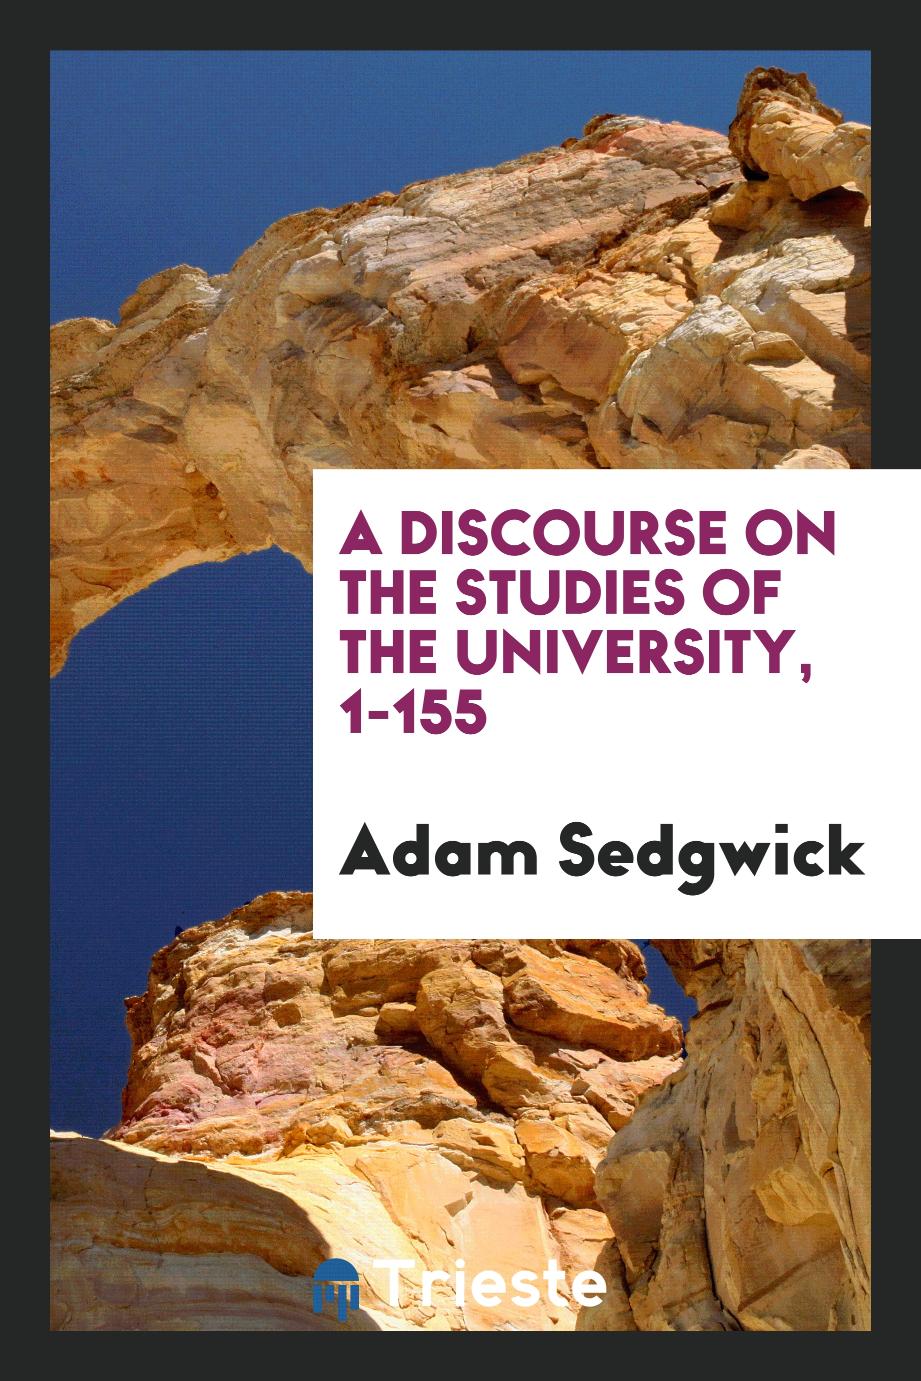 A Discourse on the Studies of the University, 1-155